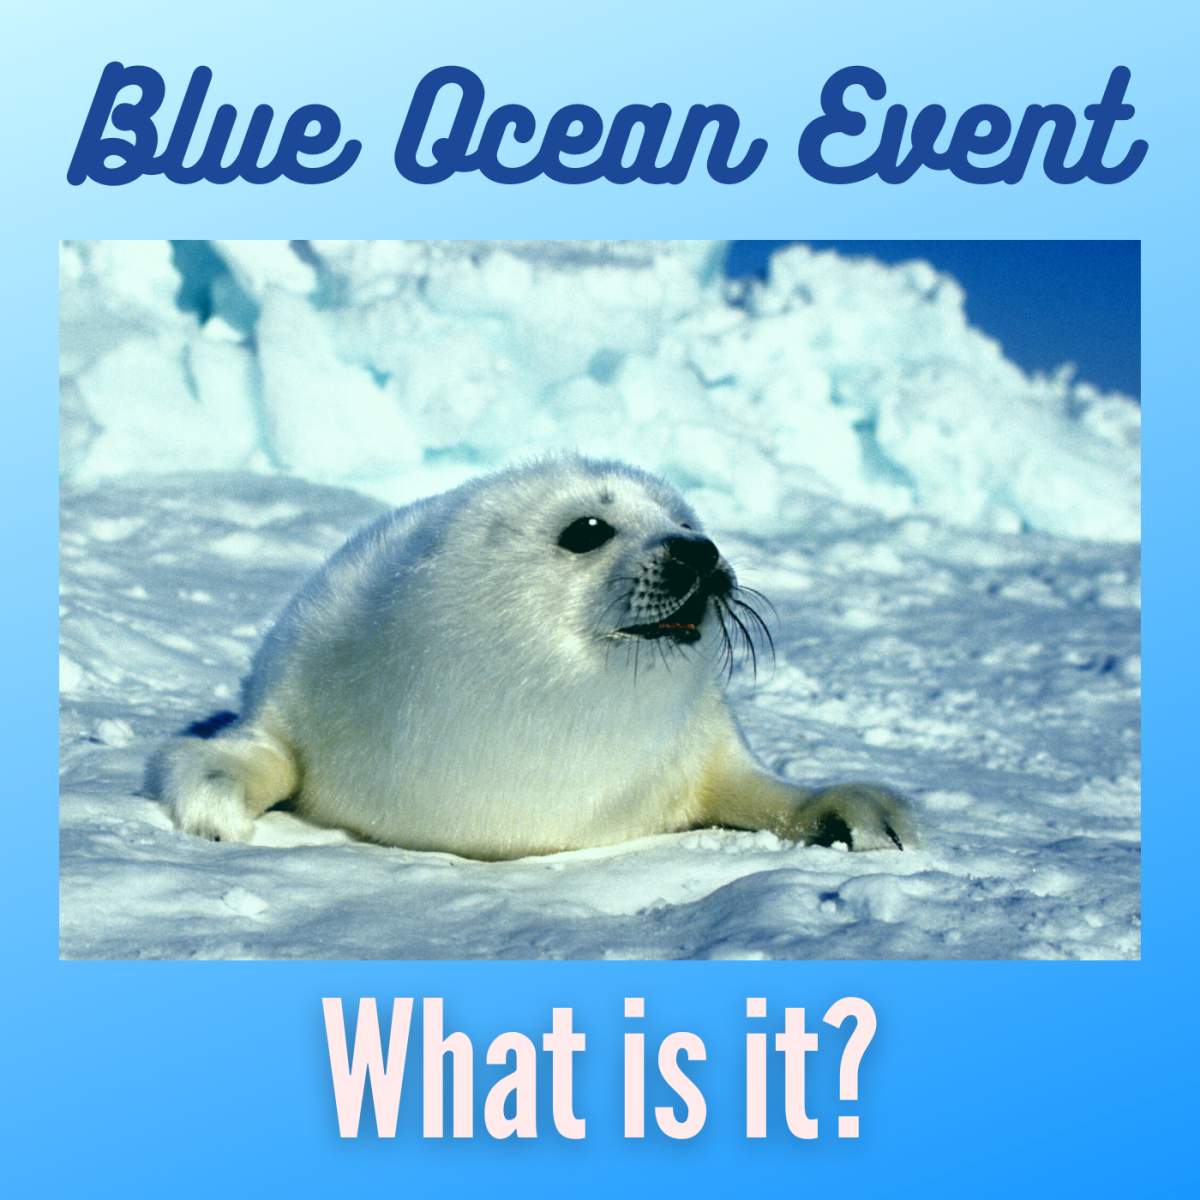 What Is a Blue Ocean Event and How Will It Impact Global Climate?